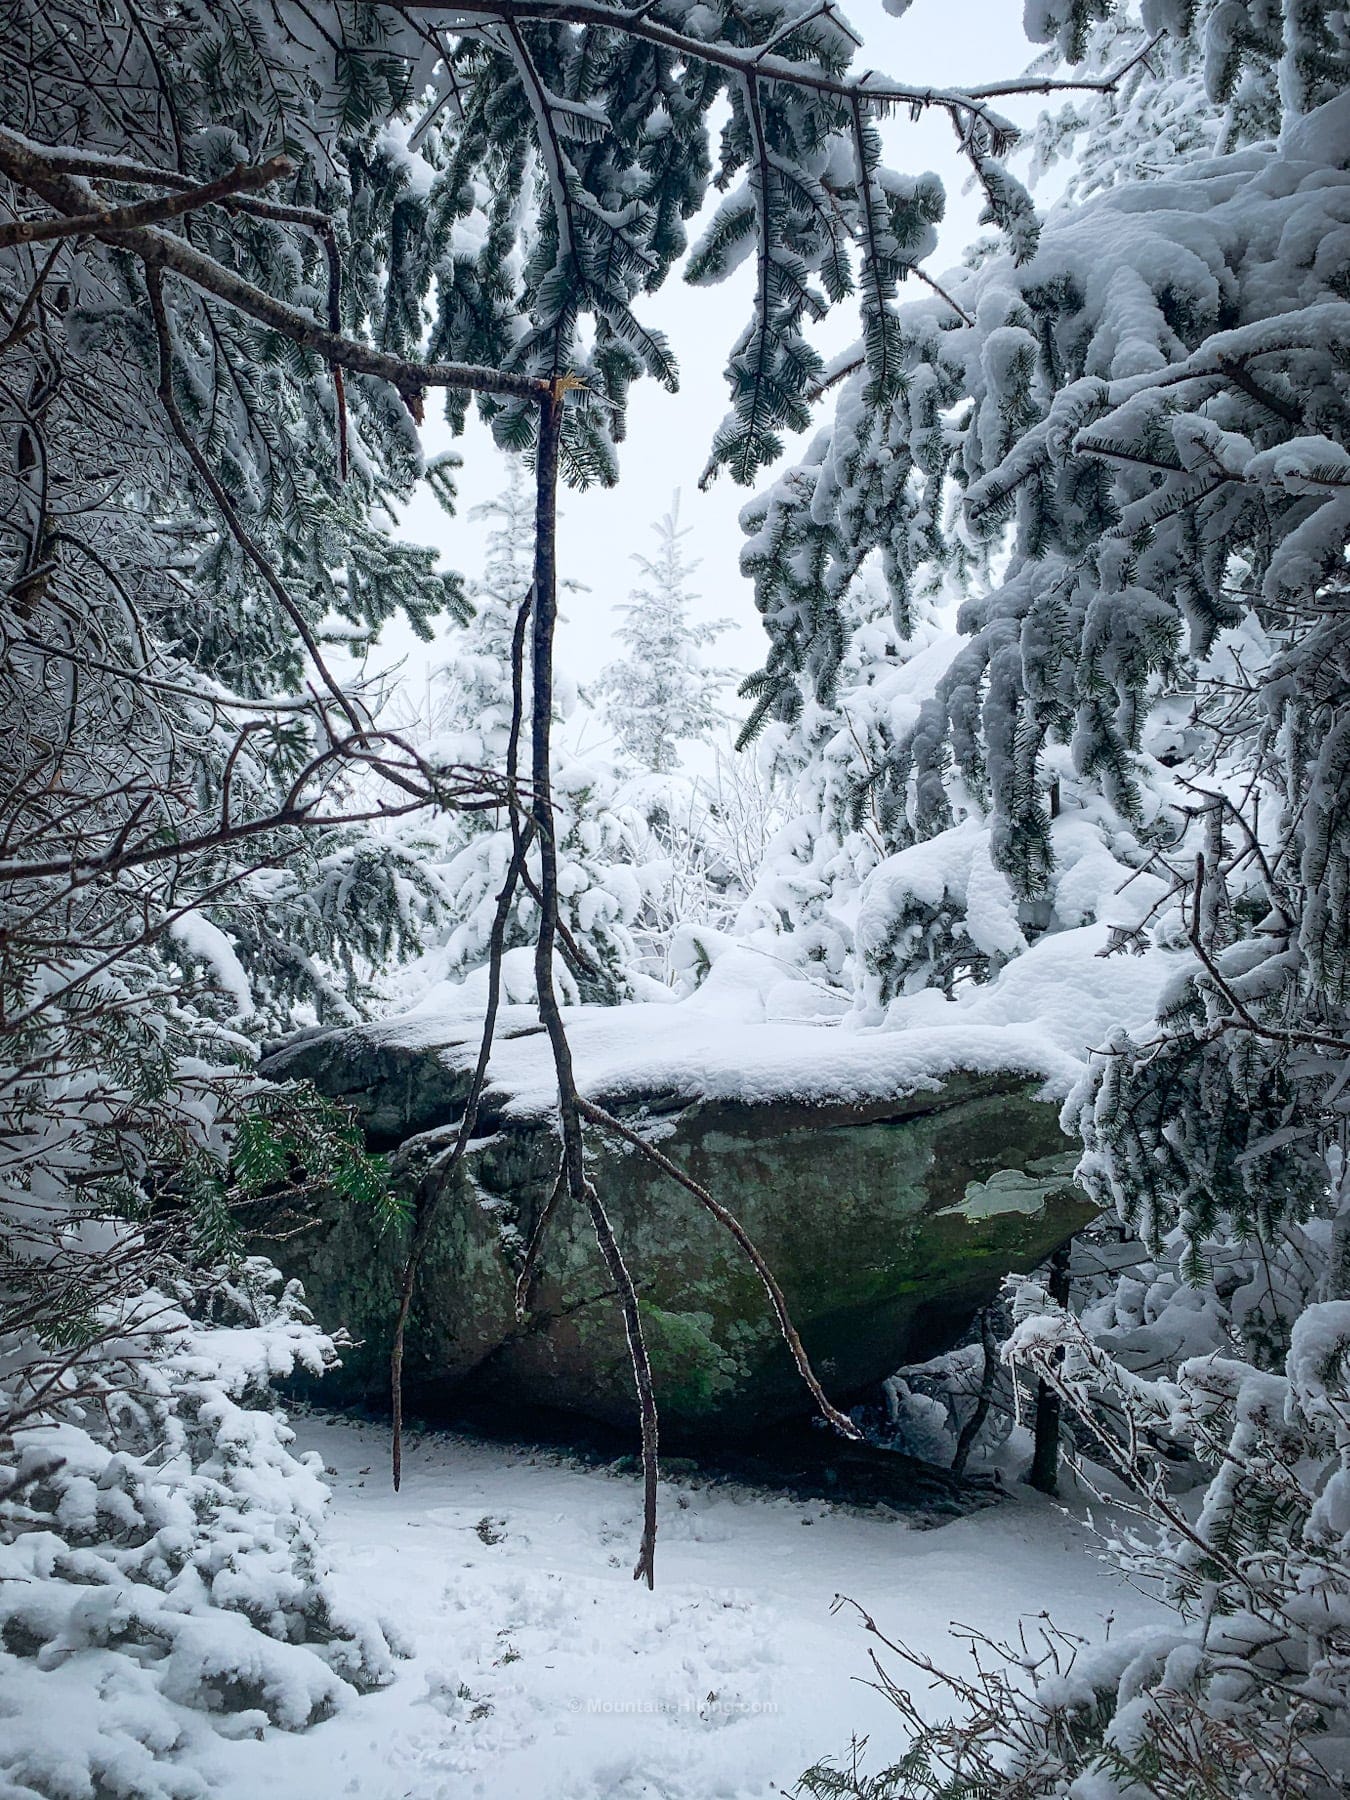 large boulder in snowy woods